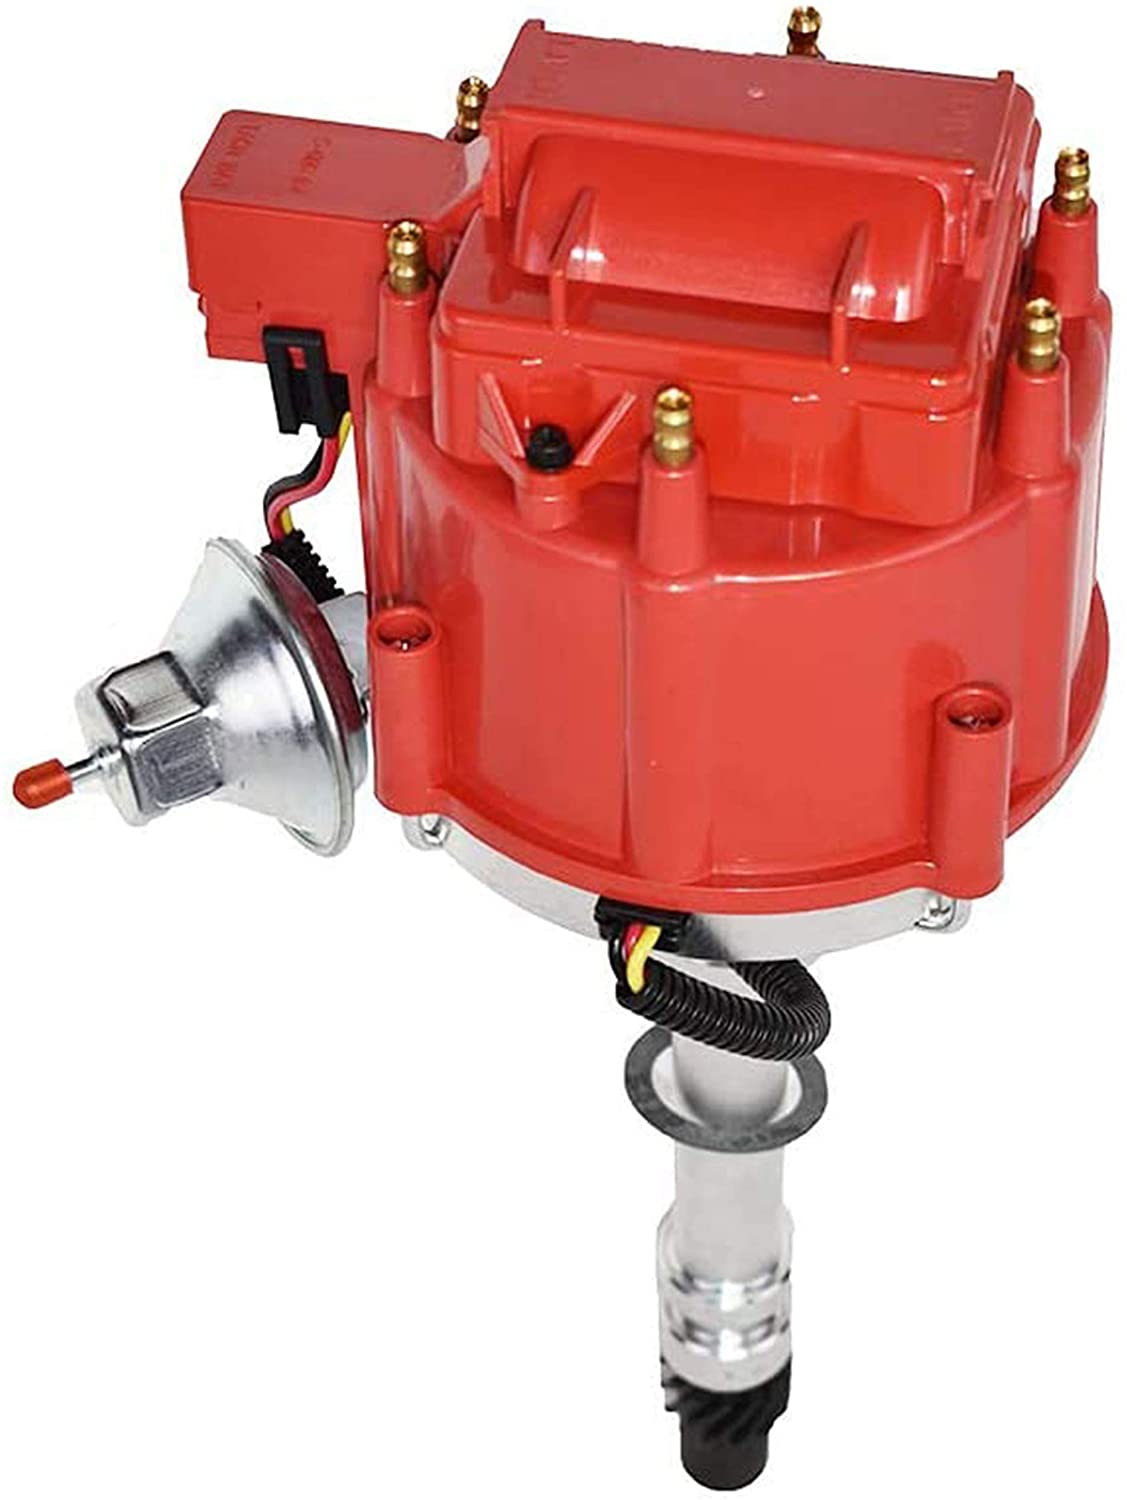 A-Team Performance Complete HEI Distributor 65K Coil 7500 RPM Compatible With Chevrolet Chevy GM GMC 4.3L 262 V6 EFI to CARB SWAP 90° V-6 One Wire Installation Red Cap (Red)